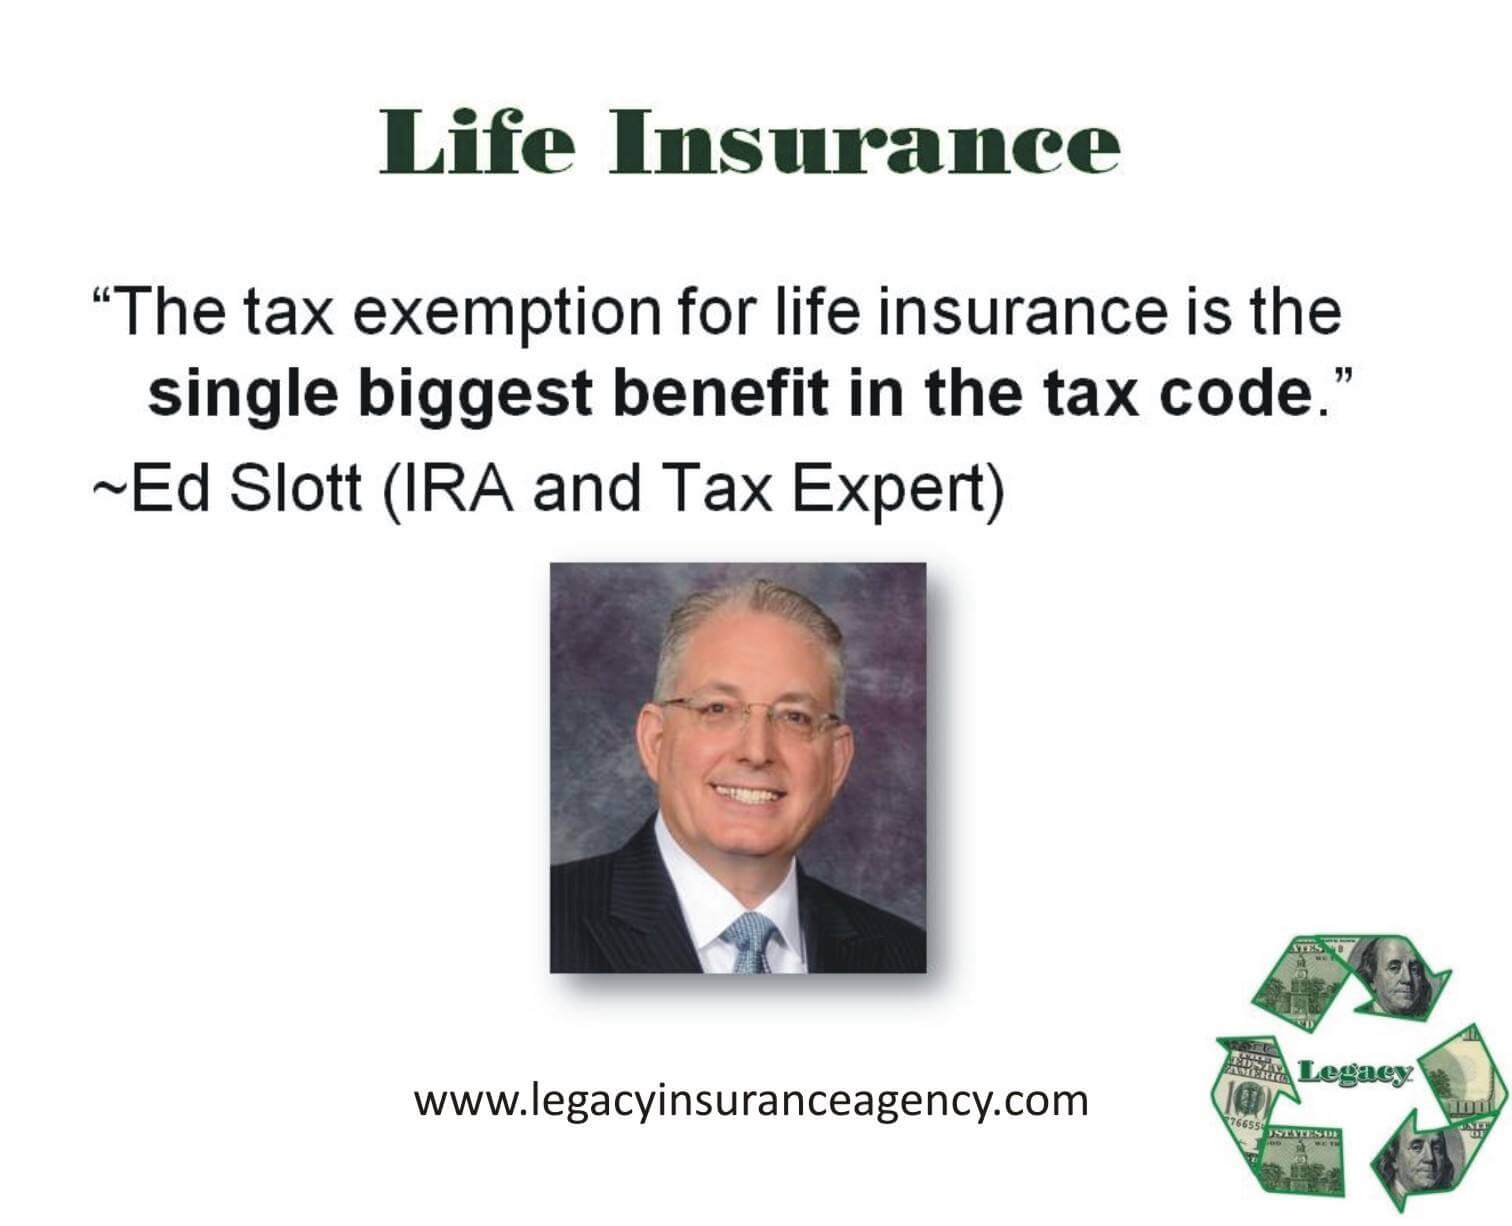 The tax exemption for life insurance is the single biggest benefit in the tax code. -Ed Slott, CPA